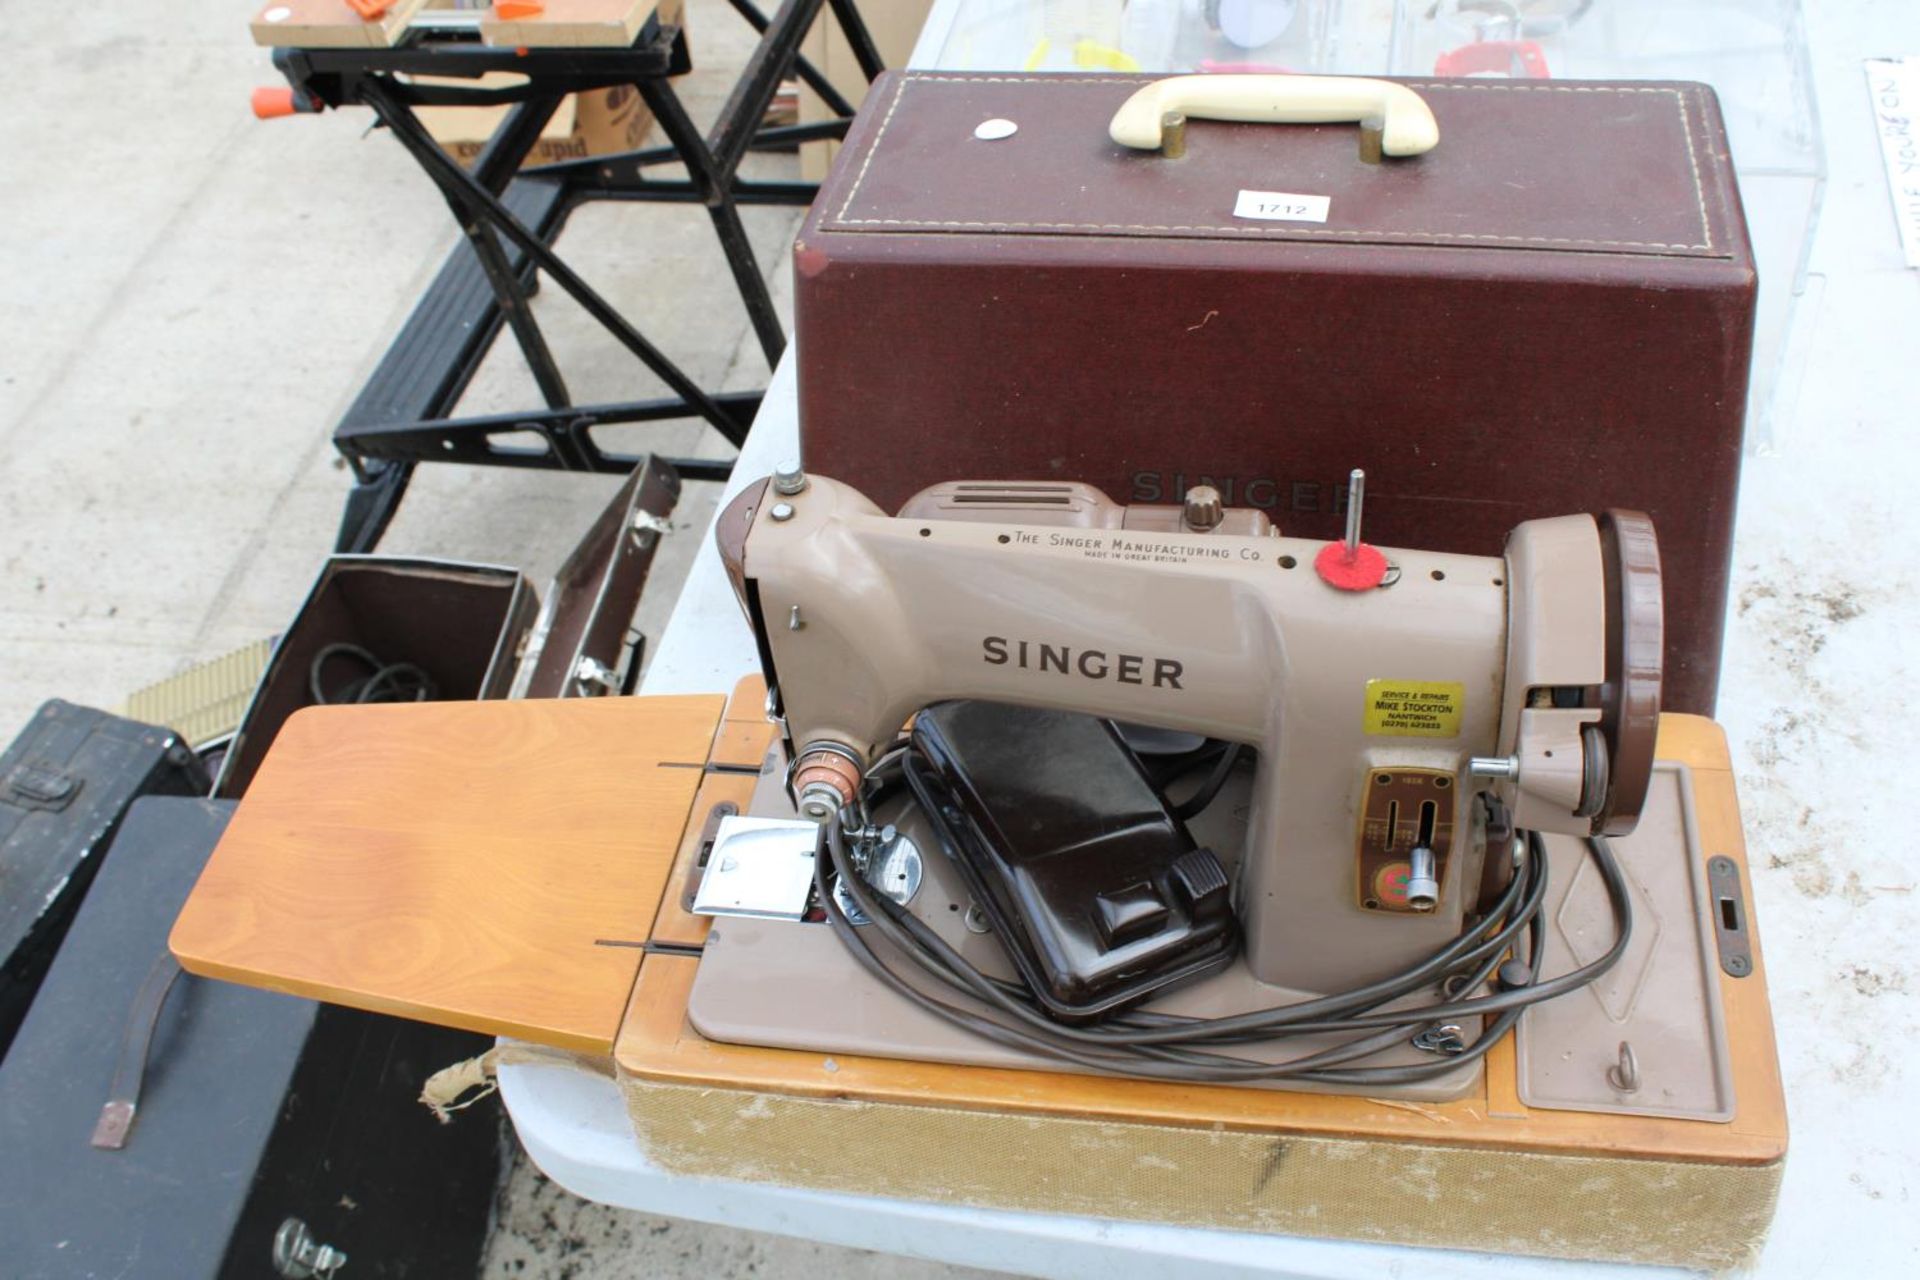 A RETRO SINGER SEWING MACHINE WITH CARRY CASE - Image 2 of 3